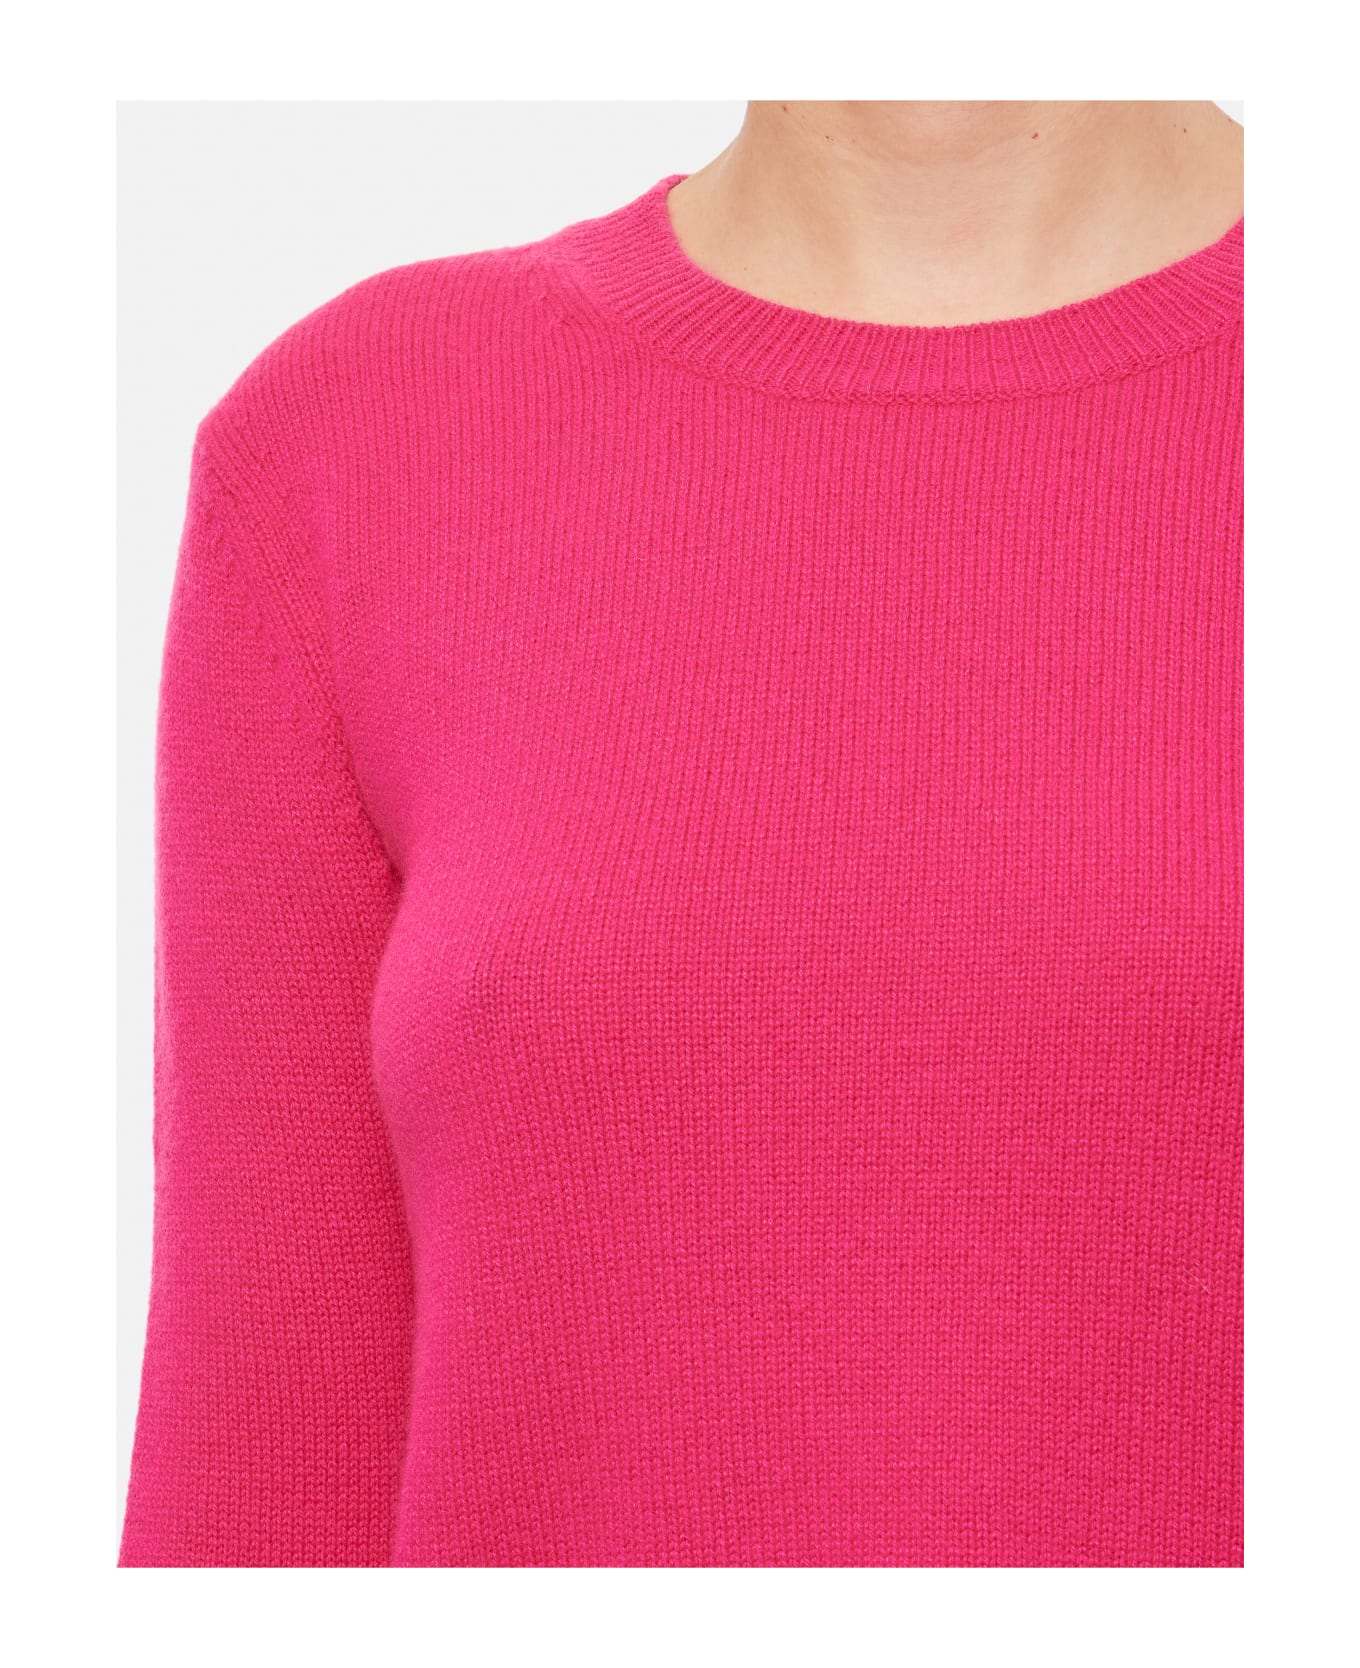 Lisa Yang Mable Cashmere Sweater - Pink ニットウェア